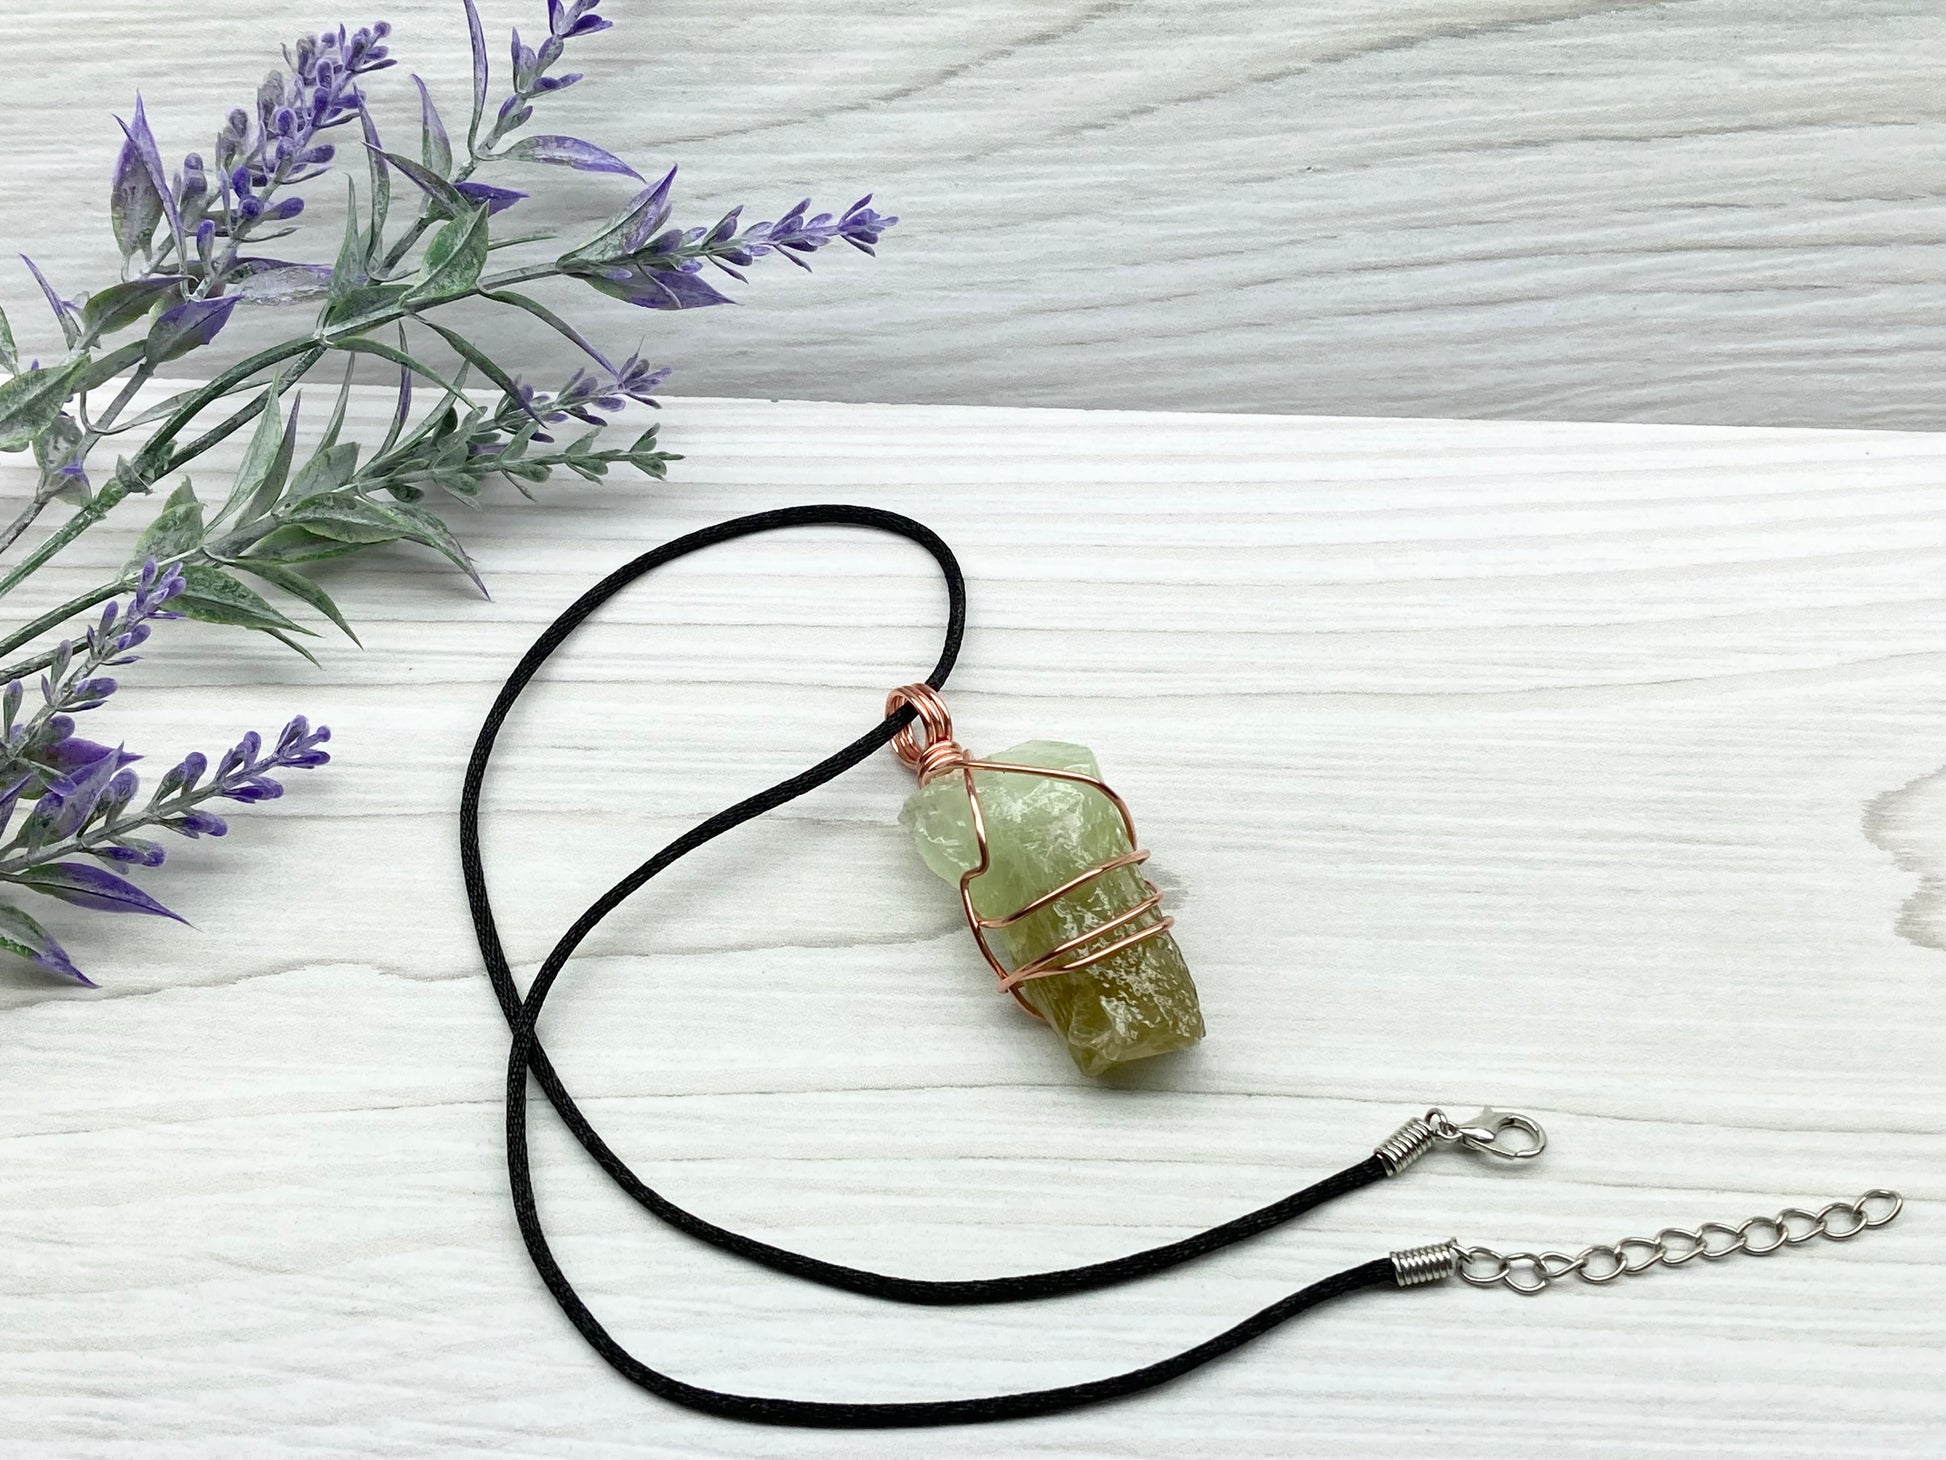 Green Calcite Necklace. Copper Wire Wrapped Stone Pendant. Raw Green Crystal. Stone Has Light Green At The Top And Dark Green At The Bottom. Comes On A Black Chain. Hand Crafted Spiritual Jewelry For Him Or Her.